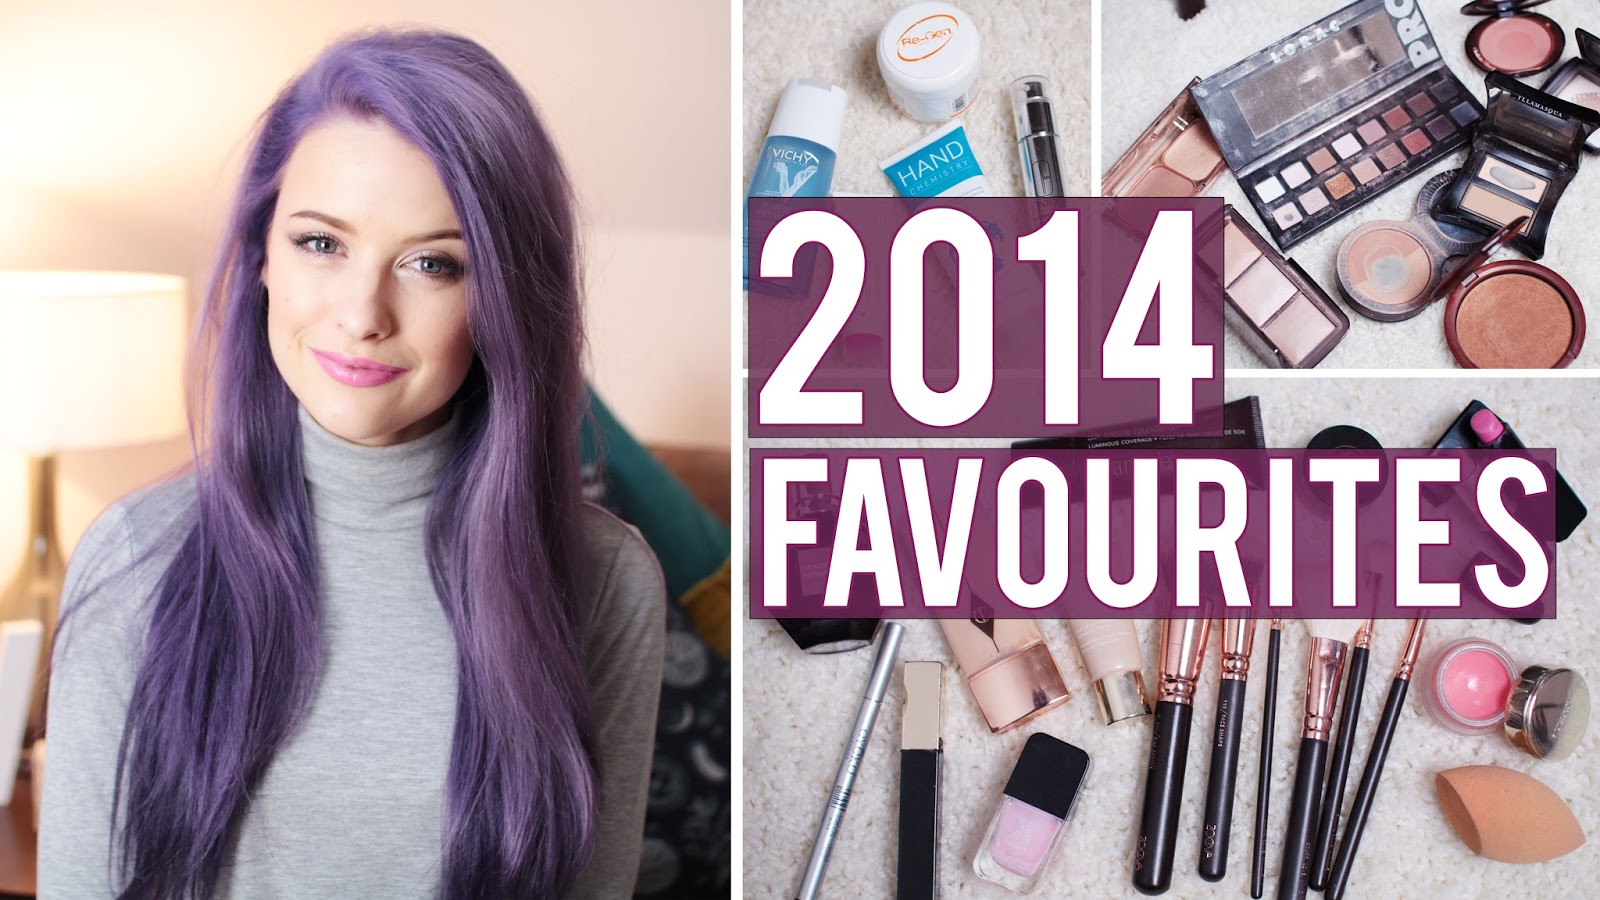 The Best Products of 2014